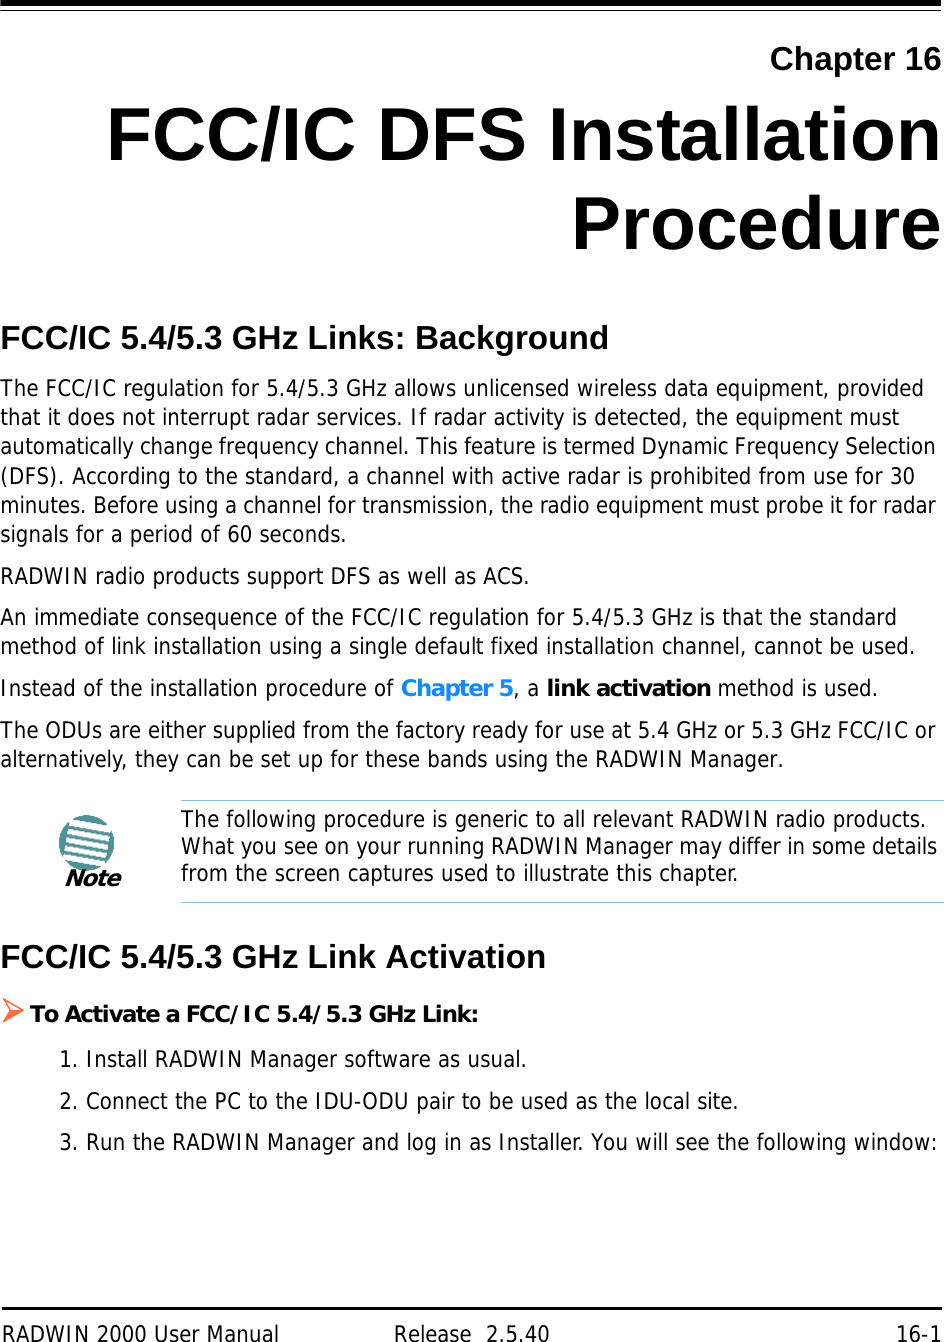 RADWIN 2000 User Manual Release  2.5.40 16-1Chapter 16FCC/IC DFS InstallationProcedureFCC/IC 5.4/5.3 GHz Links: BackgroundThe FCC/IC regulation for 5.4/5.3 GHz allows unlicensed wireless data equipment, provided that it does not interrupt radar services. If radar activity is detected, the equipment must automatically change frequency channel. This feature is termed Dynamic Frequency Selection (DFS). According to the standard, a channel with active radar is prohibited from use for 30 minutes. Before using a channel for transmission, the radio equipment must probe it for radar signals for a period of 60 seconds.RADWIN radio products support DFS as well as ACS.An immediate consequence of the FCC/IC regulation for 5.4/5.3 GHz is that the standard method of link installation using a single default fixed installation channel, cannot be used.Instead of the installation procedure of Chapter 5, a link activation method is used.The ODUs are either supplied from the factory ready for use at 5.4 GHz or 5.3 GHz FCC/IC or alternatively, they can be set up for these bands using the RADWIN Manager.FCC/IC 5.4/5.3 GHz Link ActivationTo Activate a FCC/IC 5.4/5.3 GHz Link:1. Install RADWIN Manager software as usual.2. Connect the PC to the IDU-ODU pair to be used as the local site.3. Run the RADWIN Manager and log in as Installer. You will see the following window:NoteThe following procedure is generic to all relevant RADWIN radio products. What you see on your running RADWIN Manager may differ in some details from the screen captures used to illustrate this chapter.